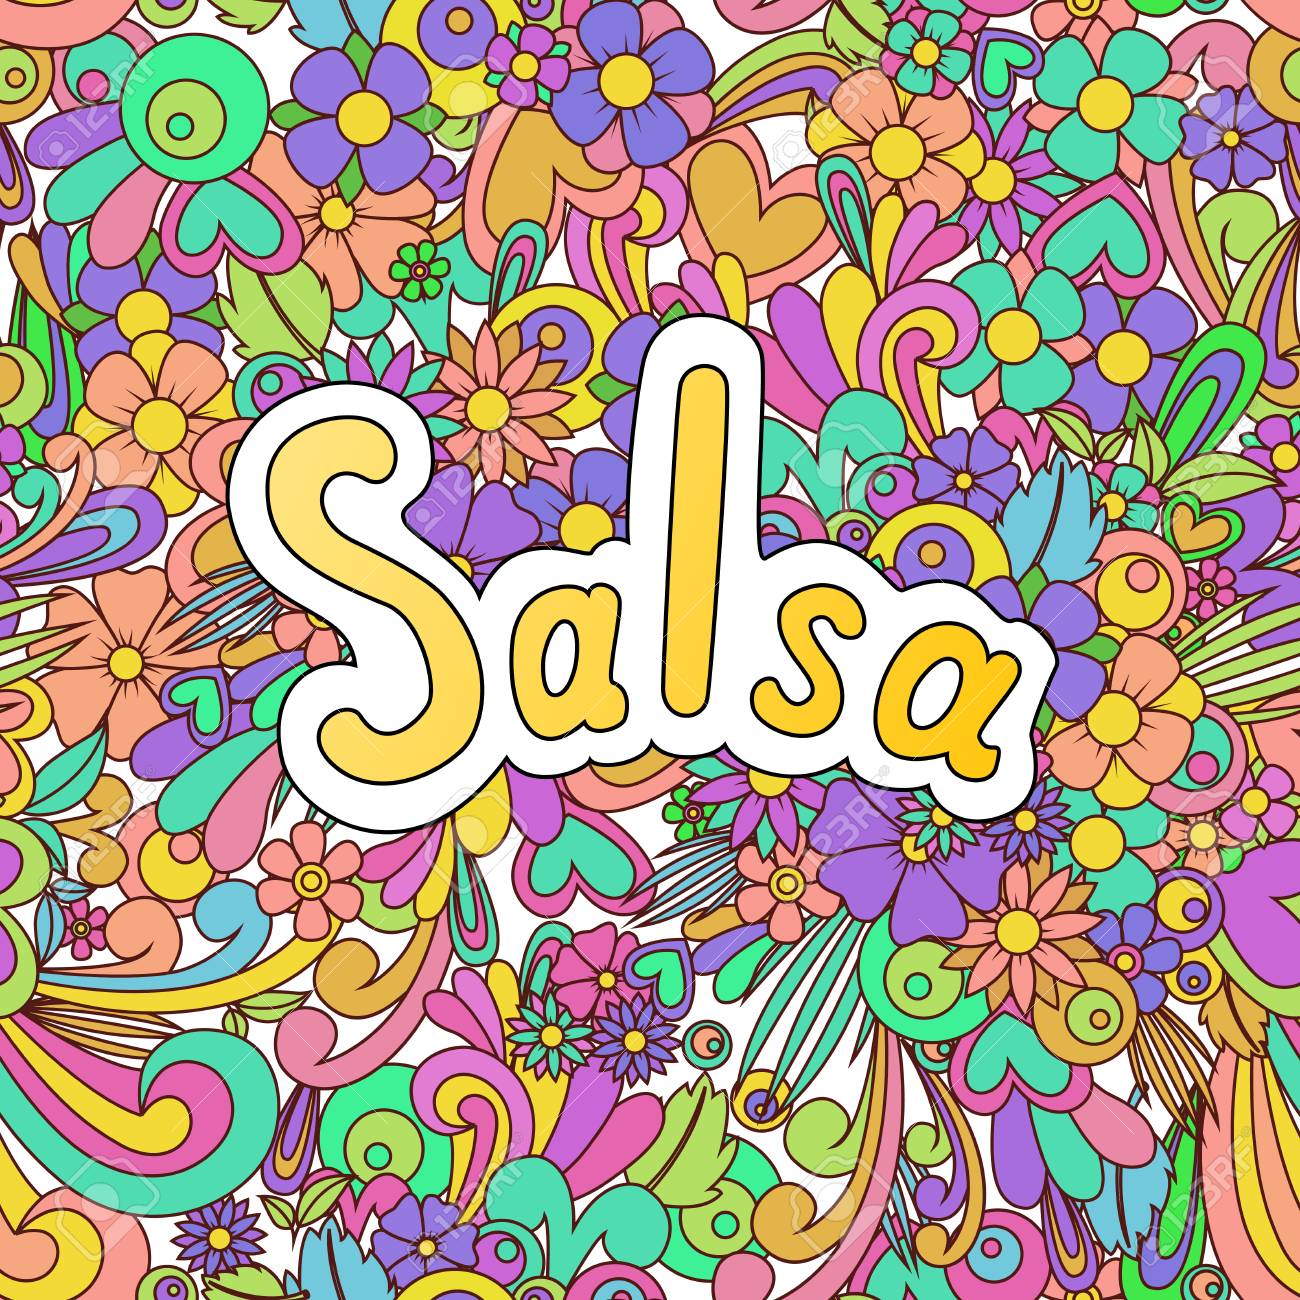 Salsa Zen Tangle Doodle Background With Flowers Wallpaper